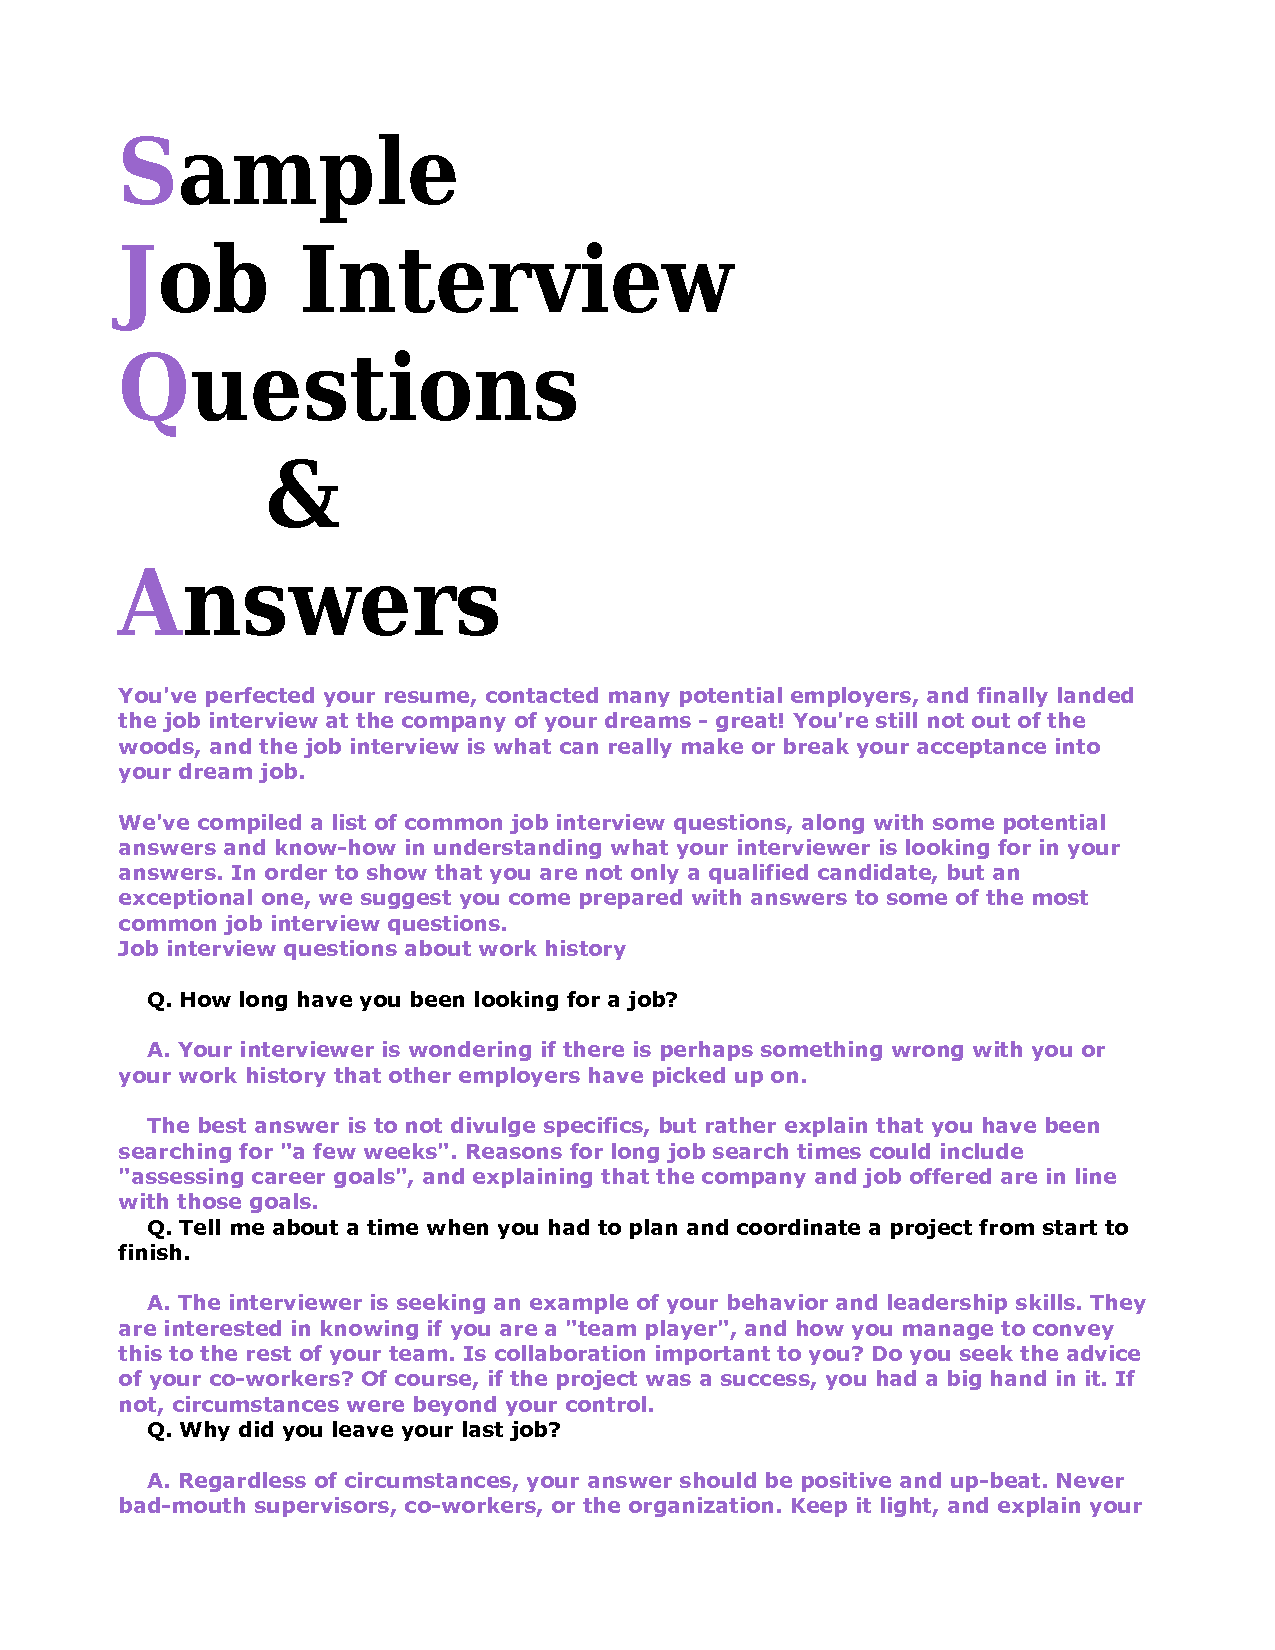 Job interview questions and anwers